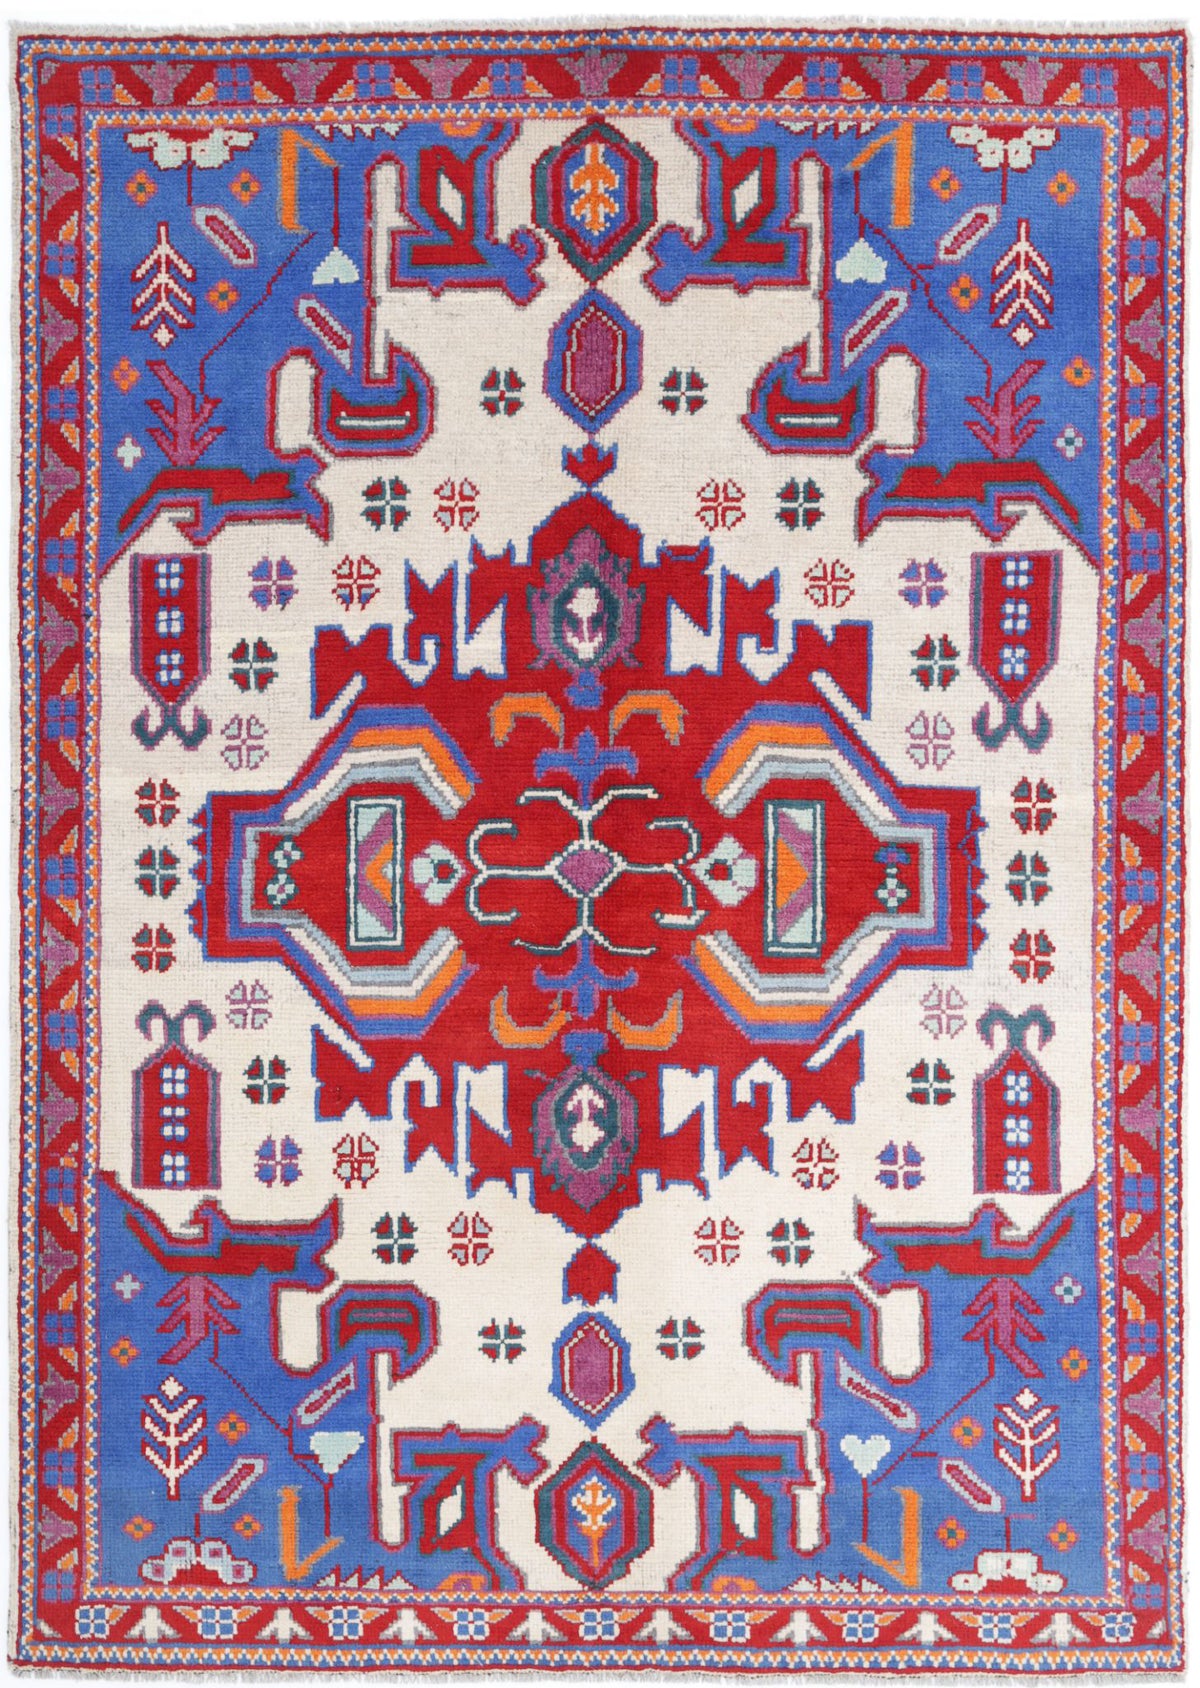 Revival-hand-knotted-qarghani-wool-rug-5014094.jpg